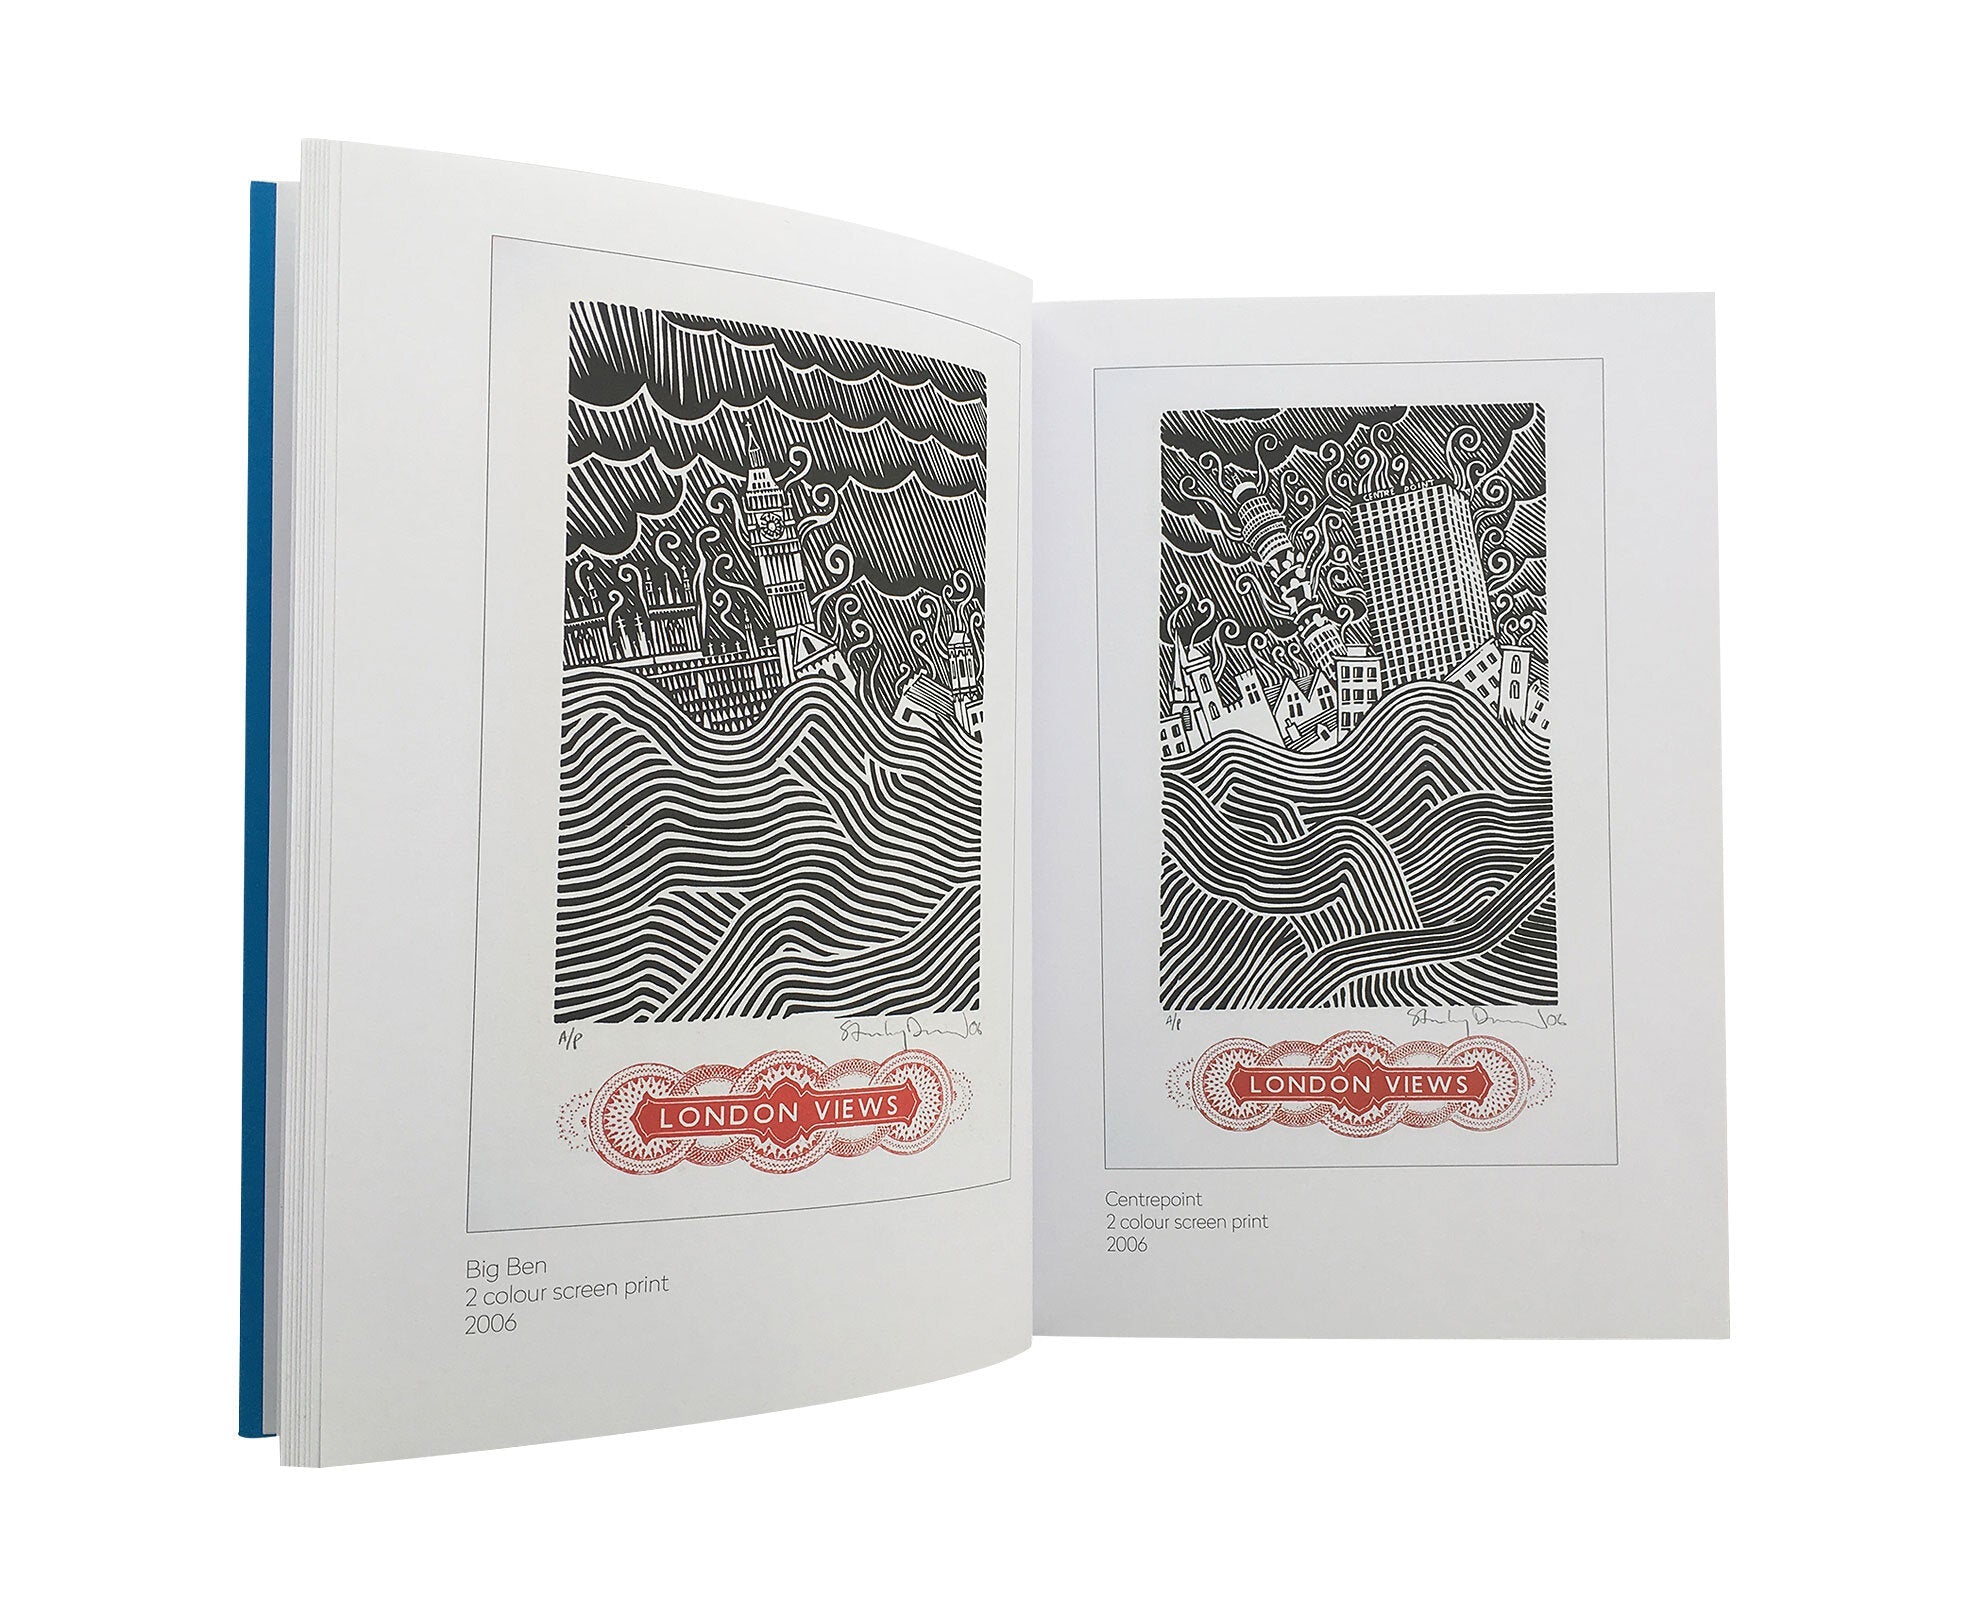 Stanley Donwood - Slowly Downward Manufactory Screen Prints 2004-2017 An Incomplete Selection